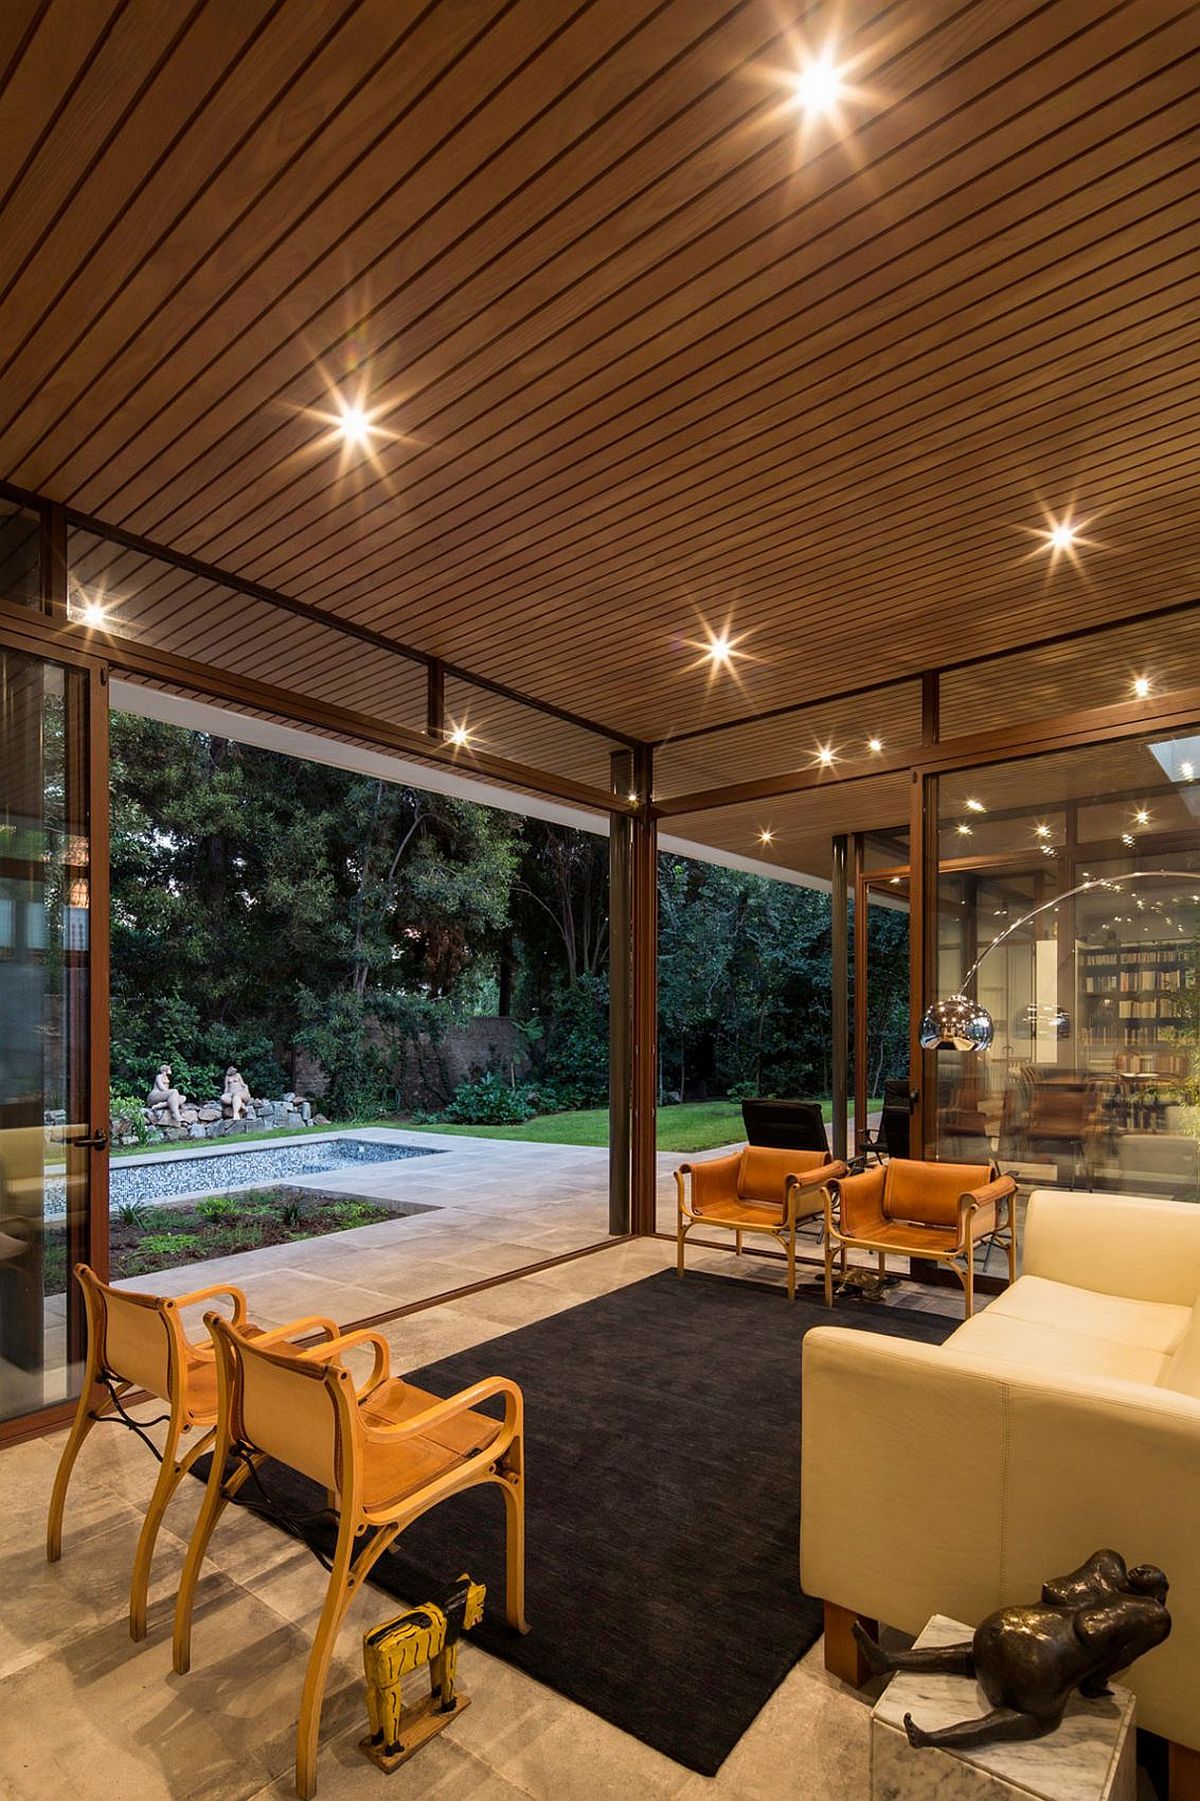 Sliding glass doors connect the sitting area with the garden